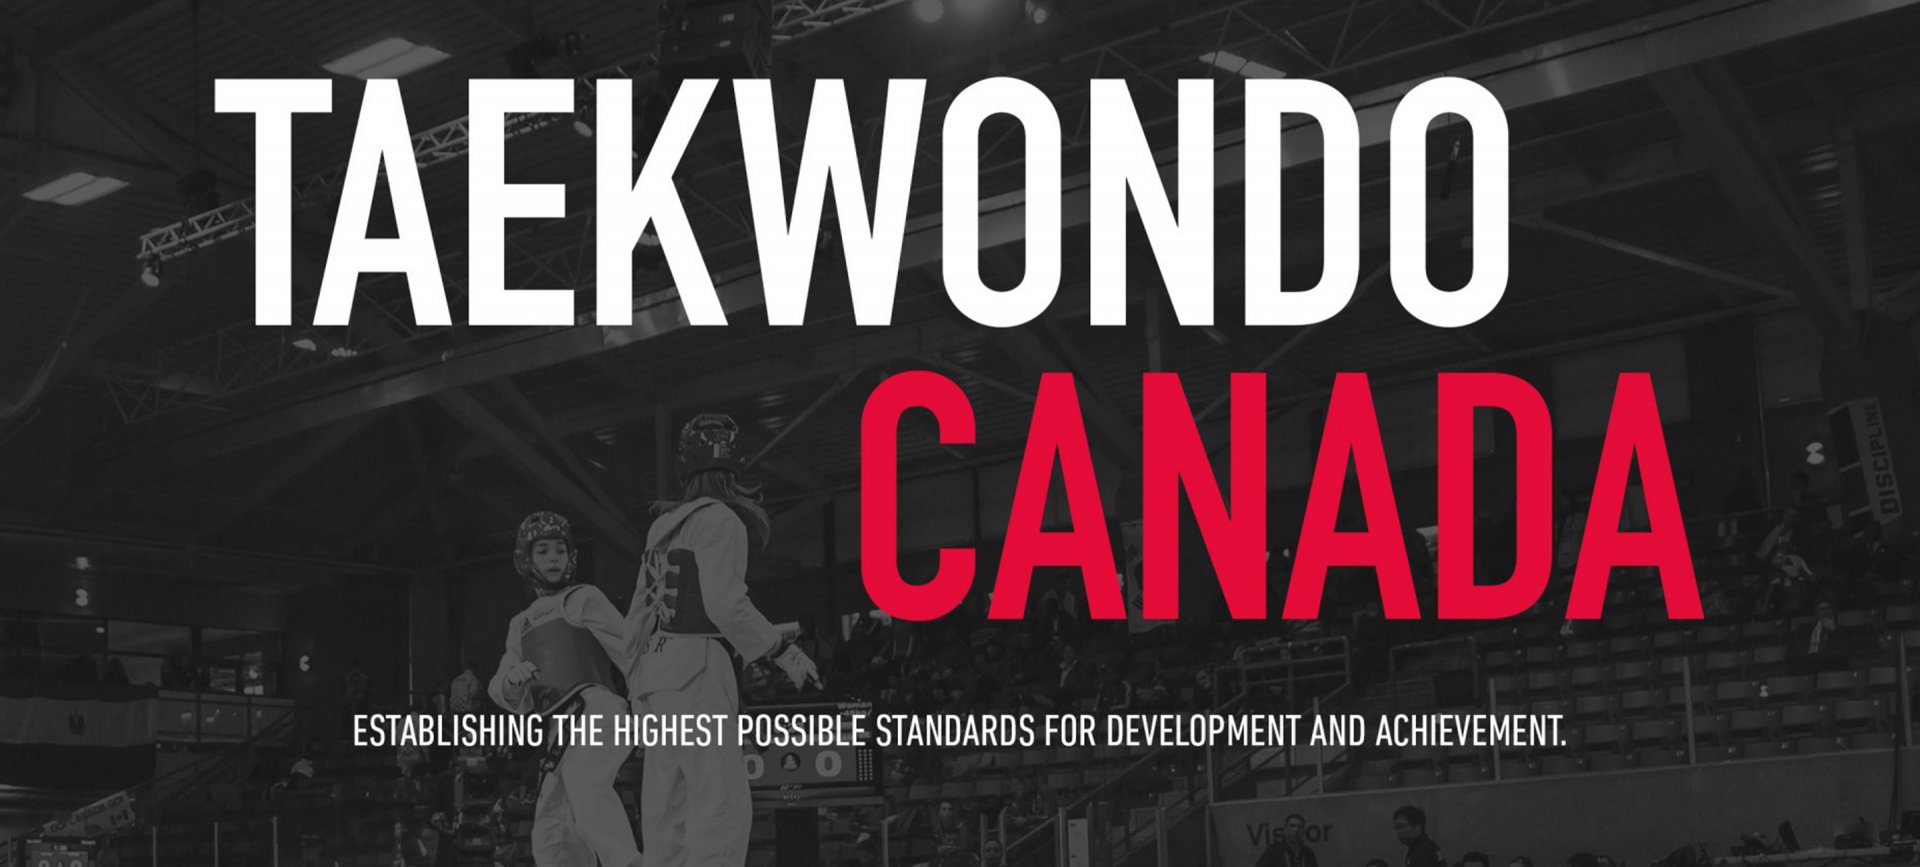 New website launched by Taekwondo Canada featuring enhanced content and navigation